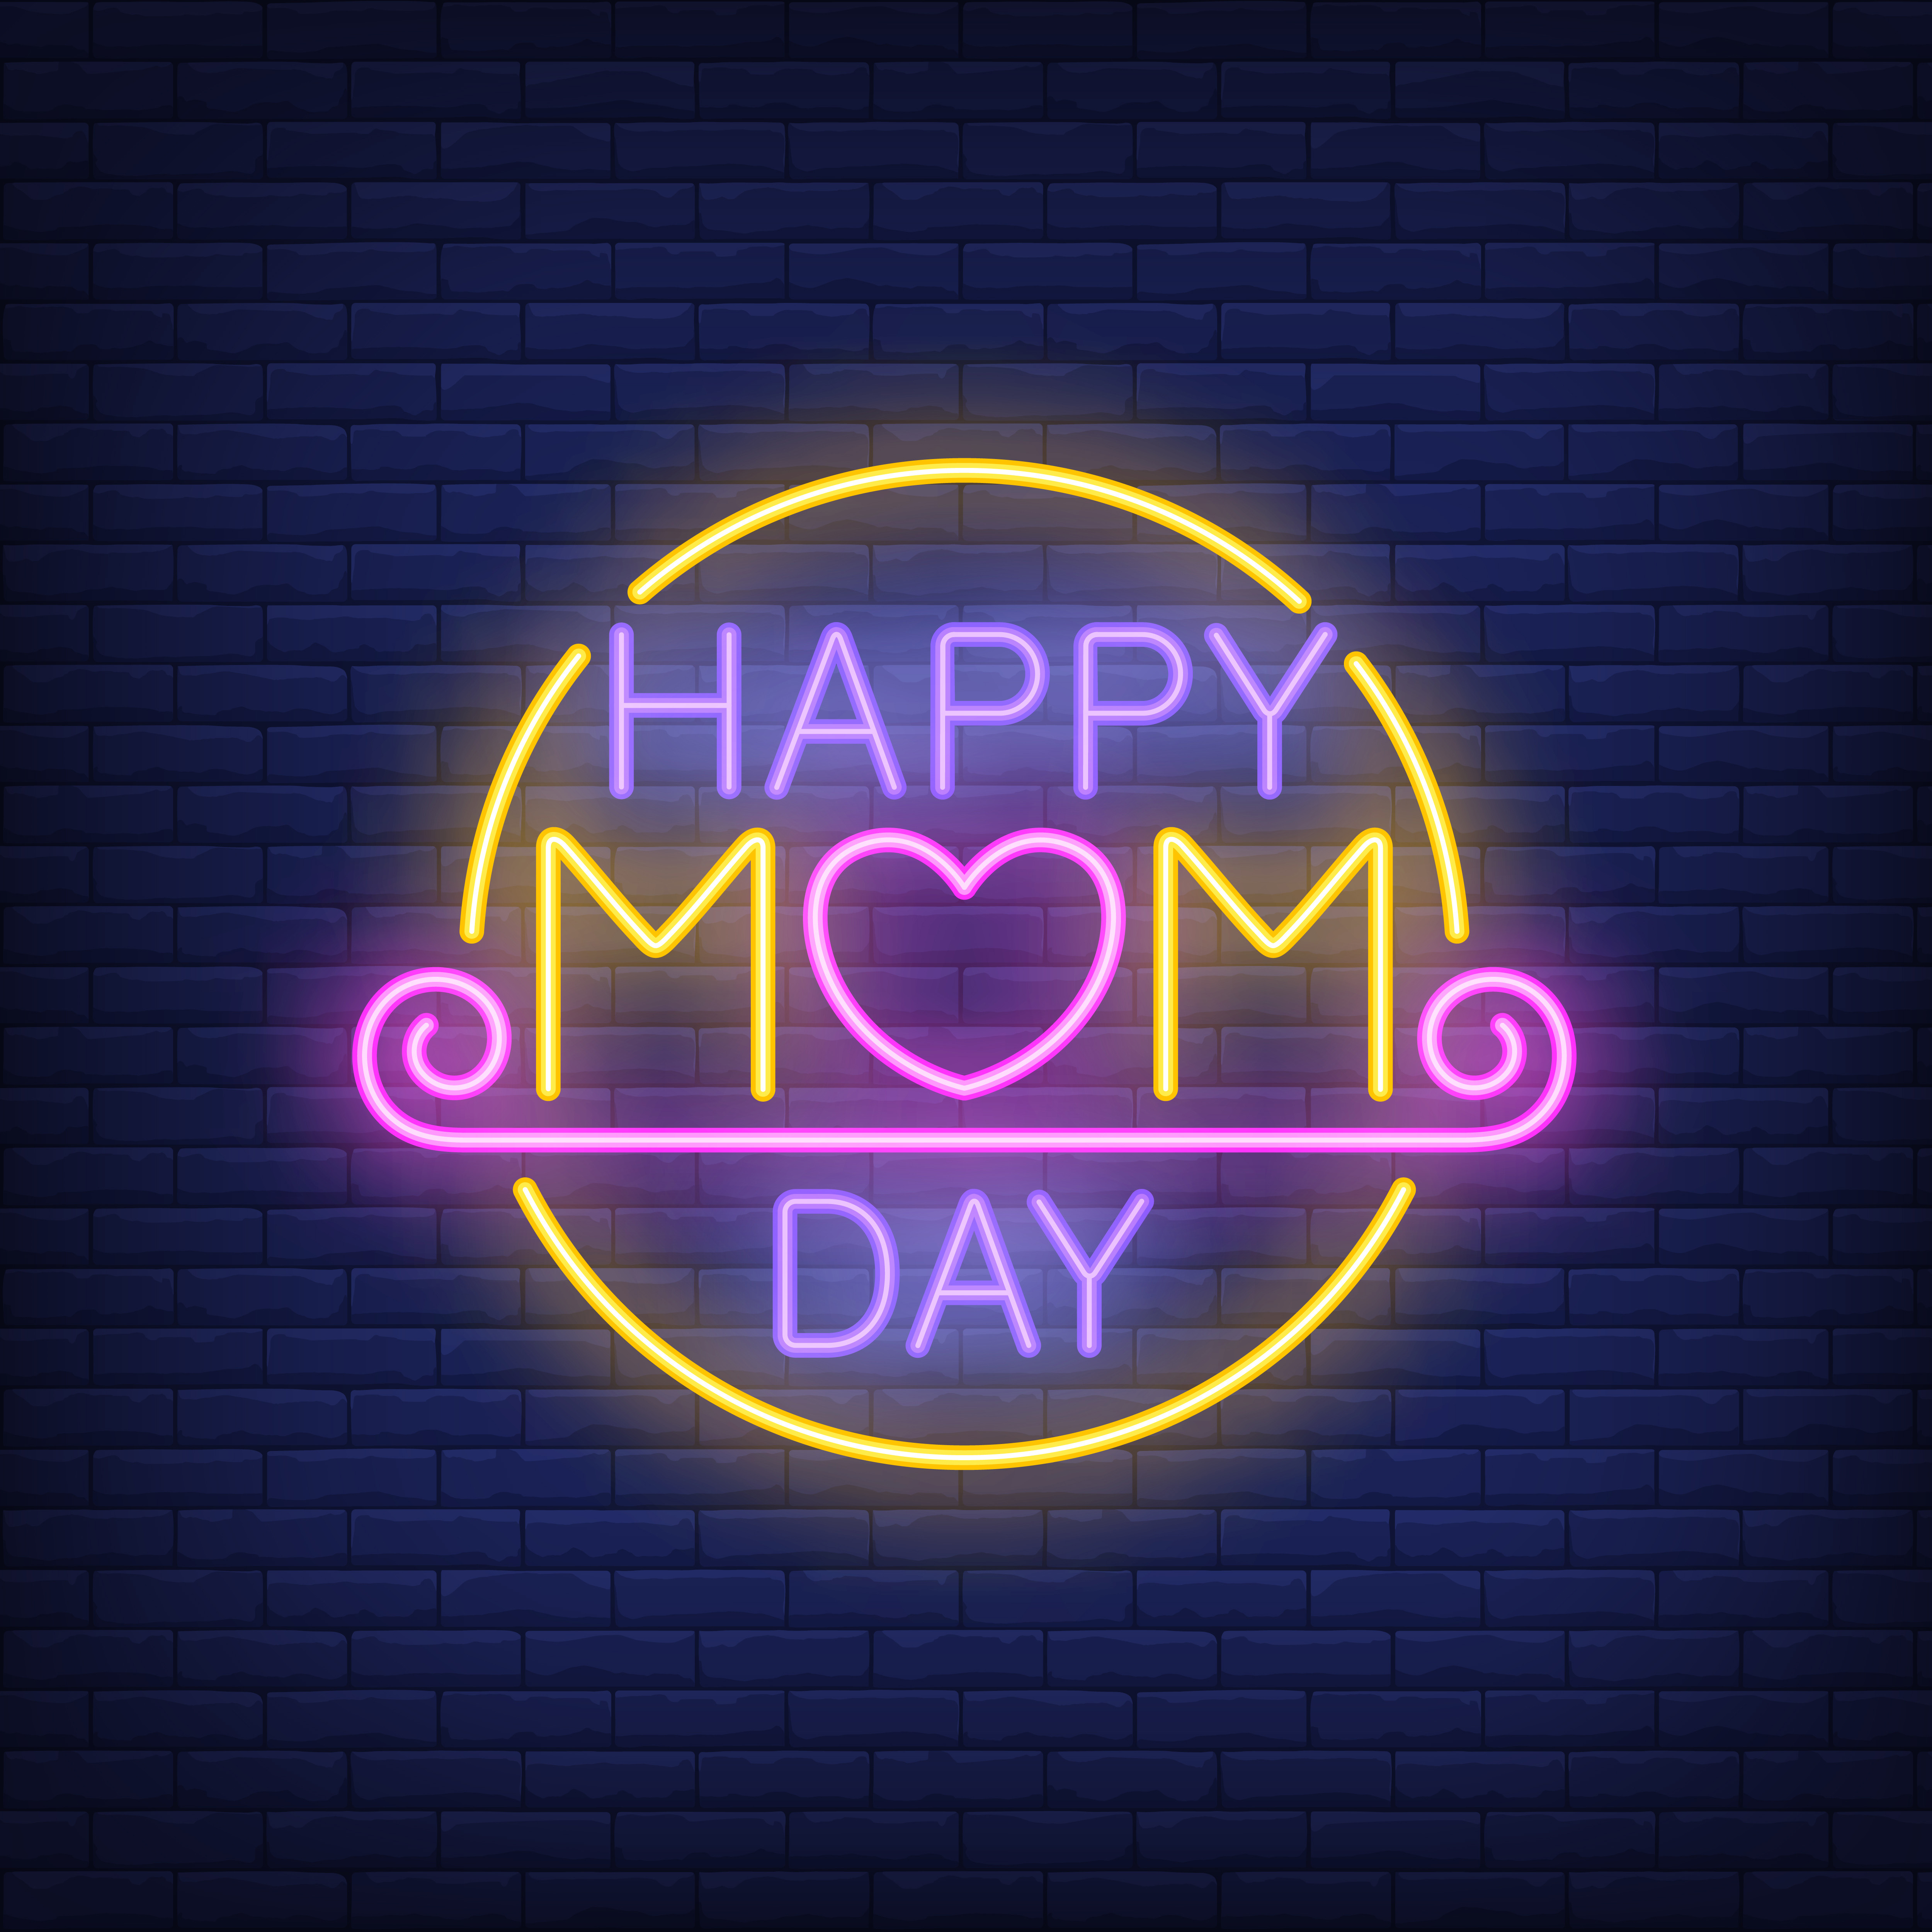 Happy mother's month sign